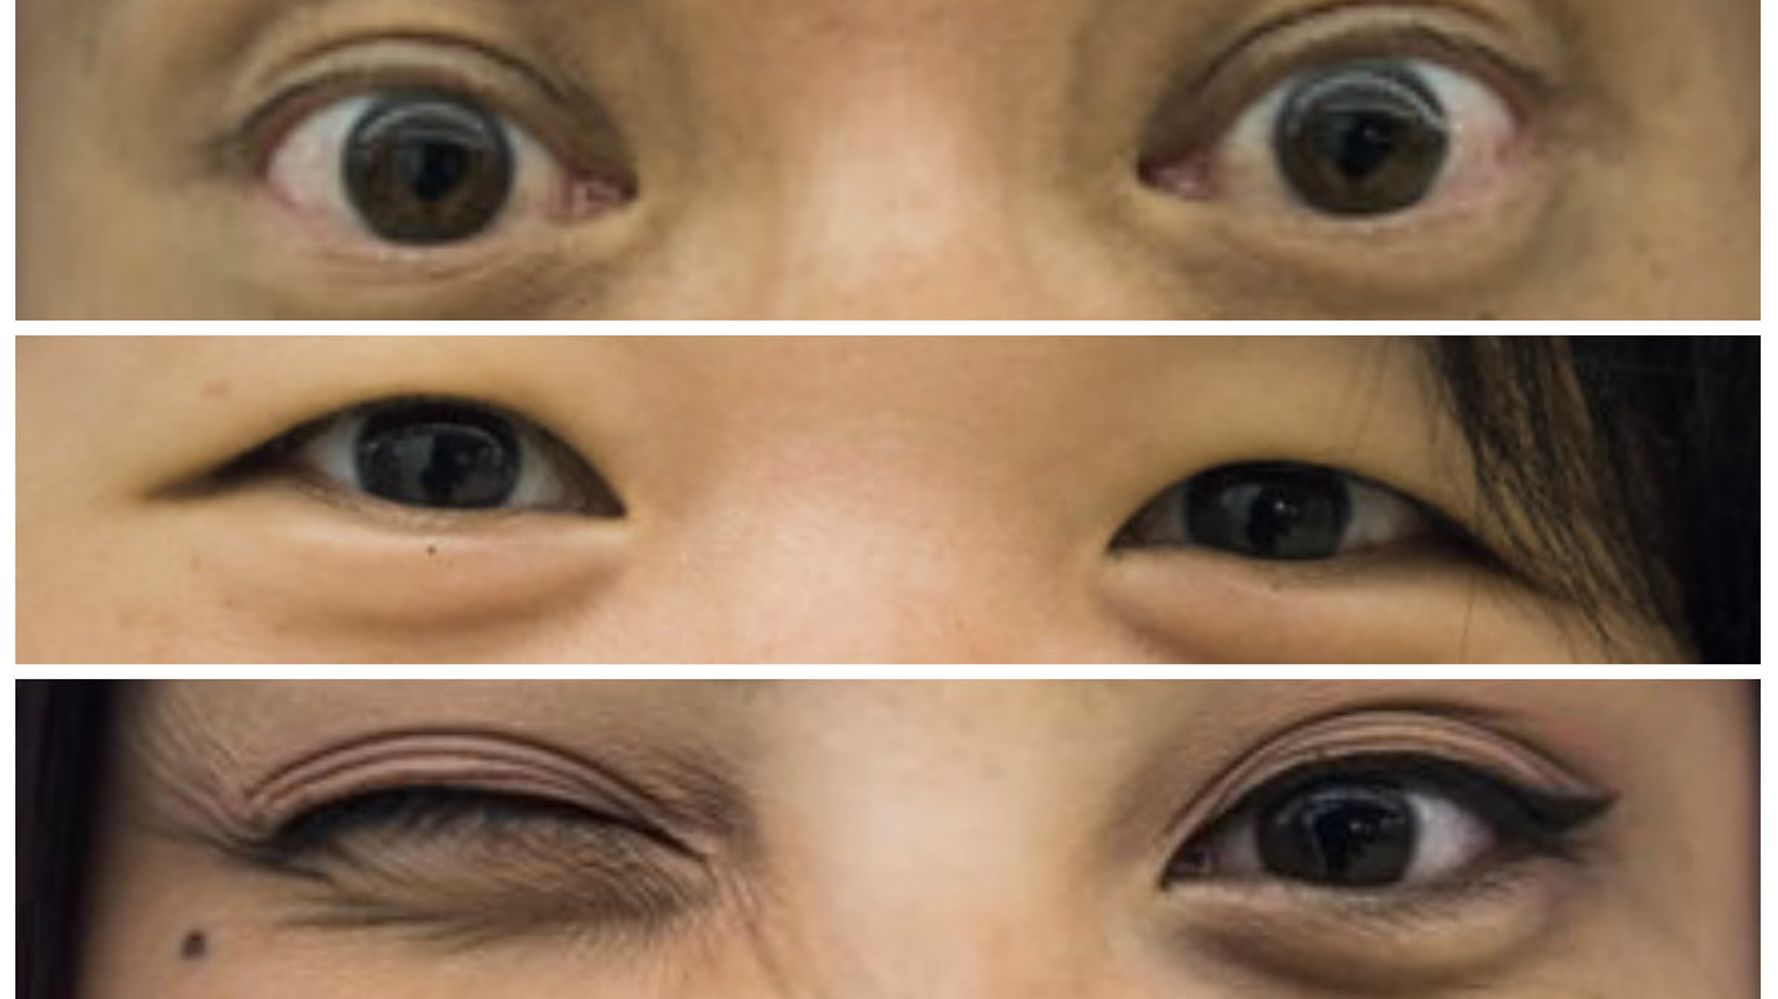 13 Asians On Identity And The Struggle Of Loving Their Eyes Huffpost